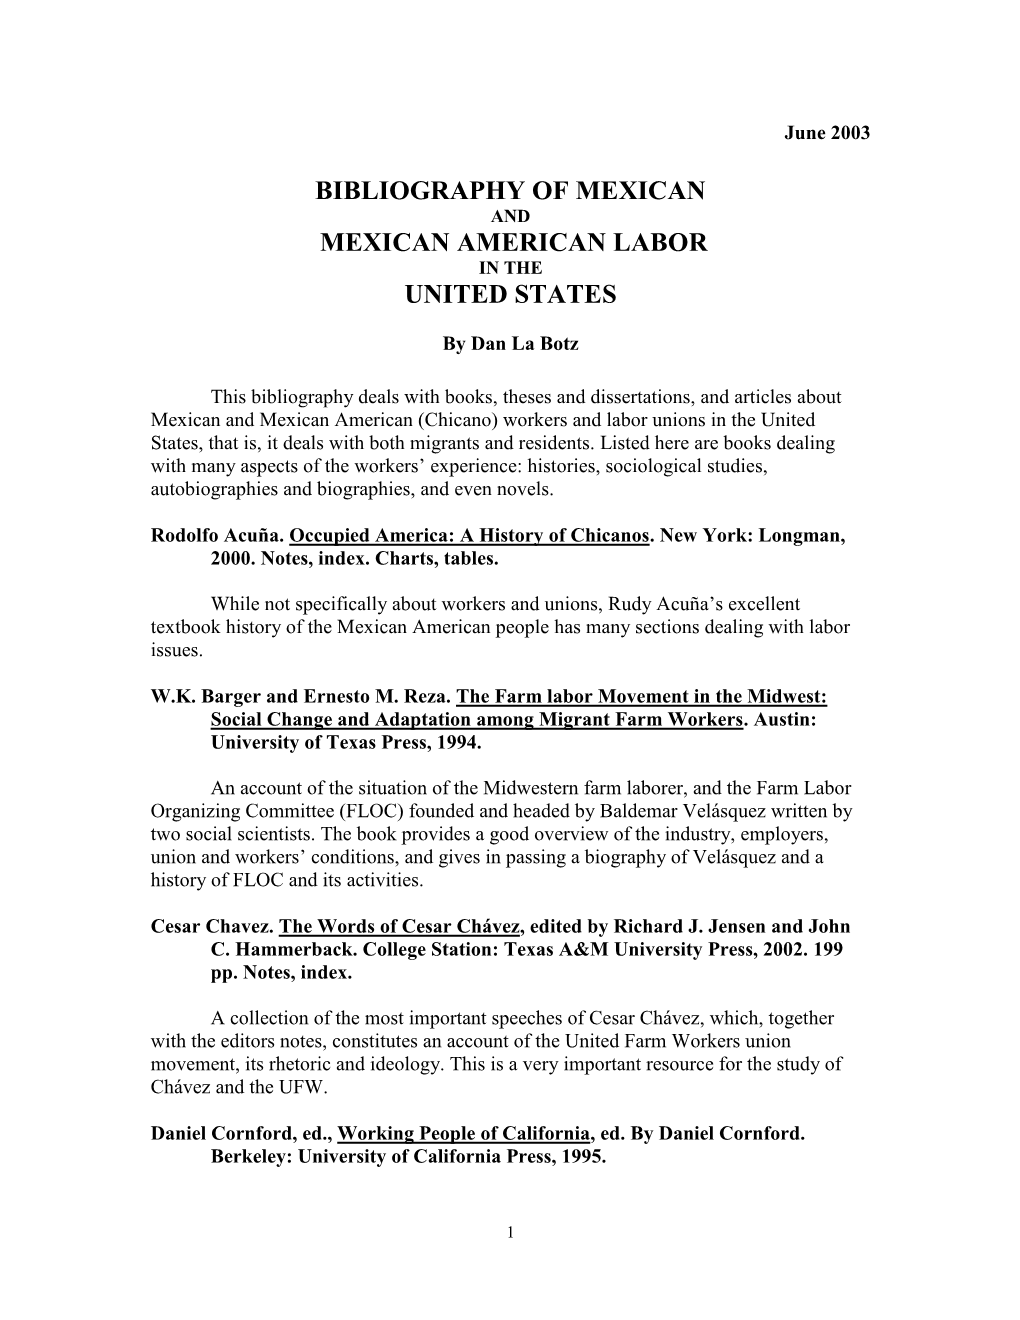 Bibliography of Mexican American Labor